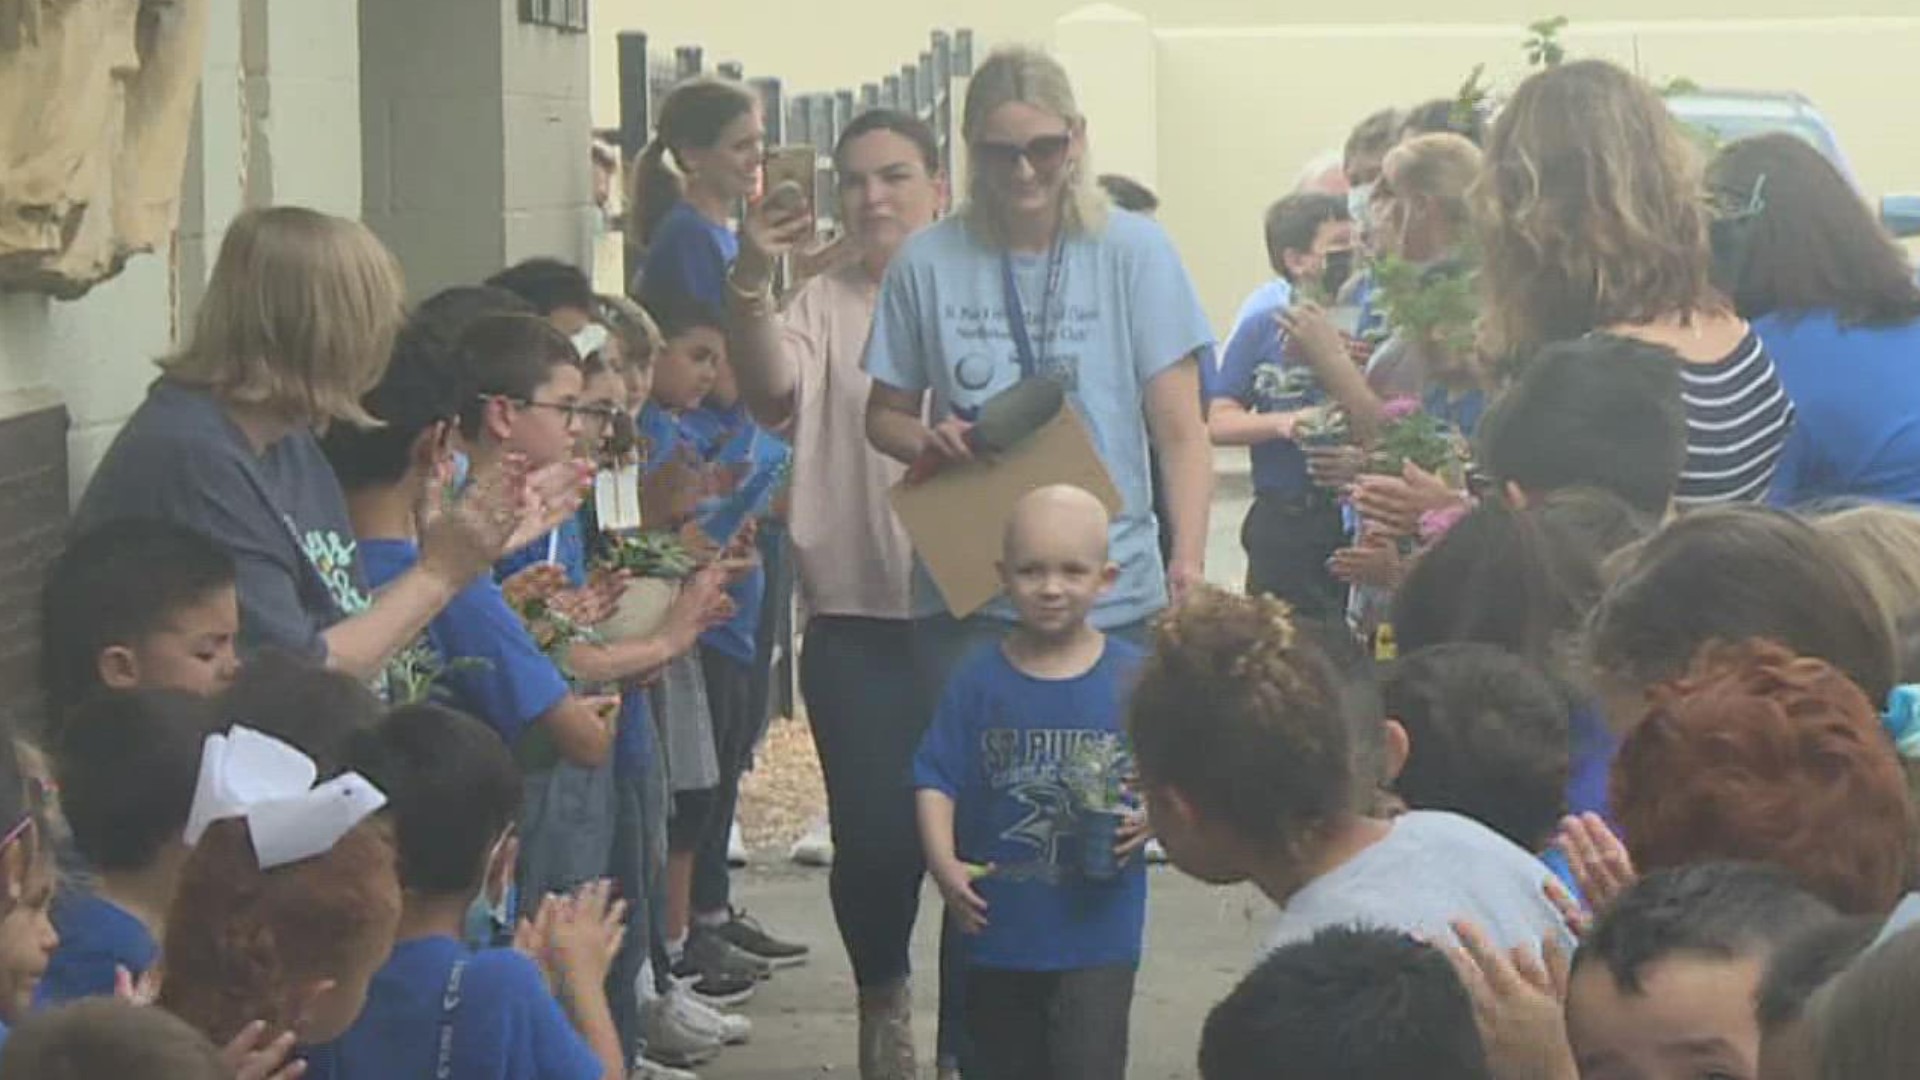 Julian Galloway is a student at St. Pius X Catholic School. He was diagnosed with medulloblastoma in 2019, just two days before Christmas